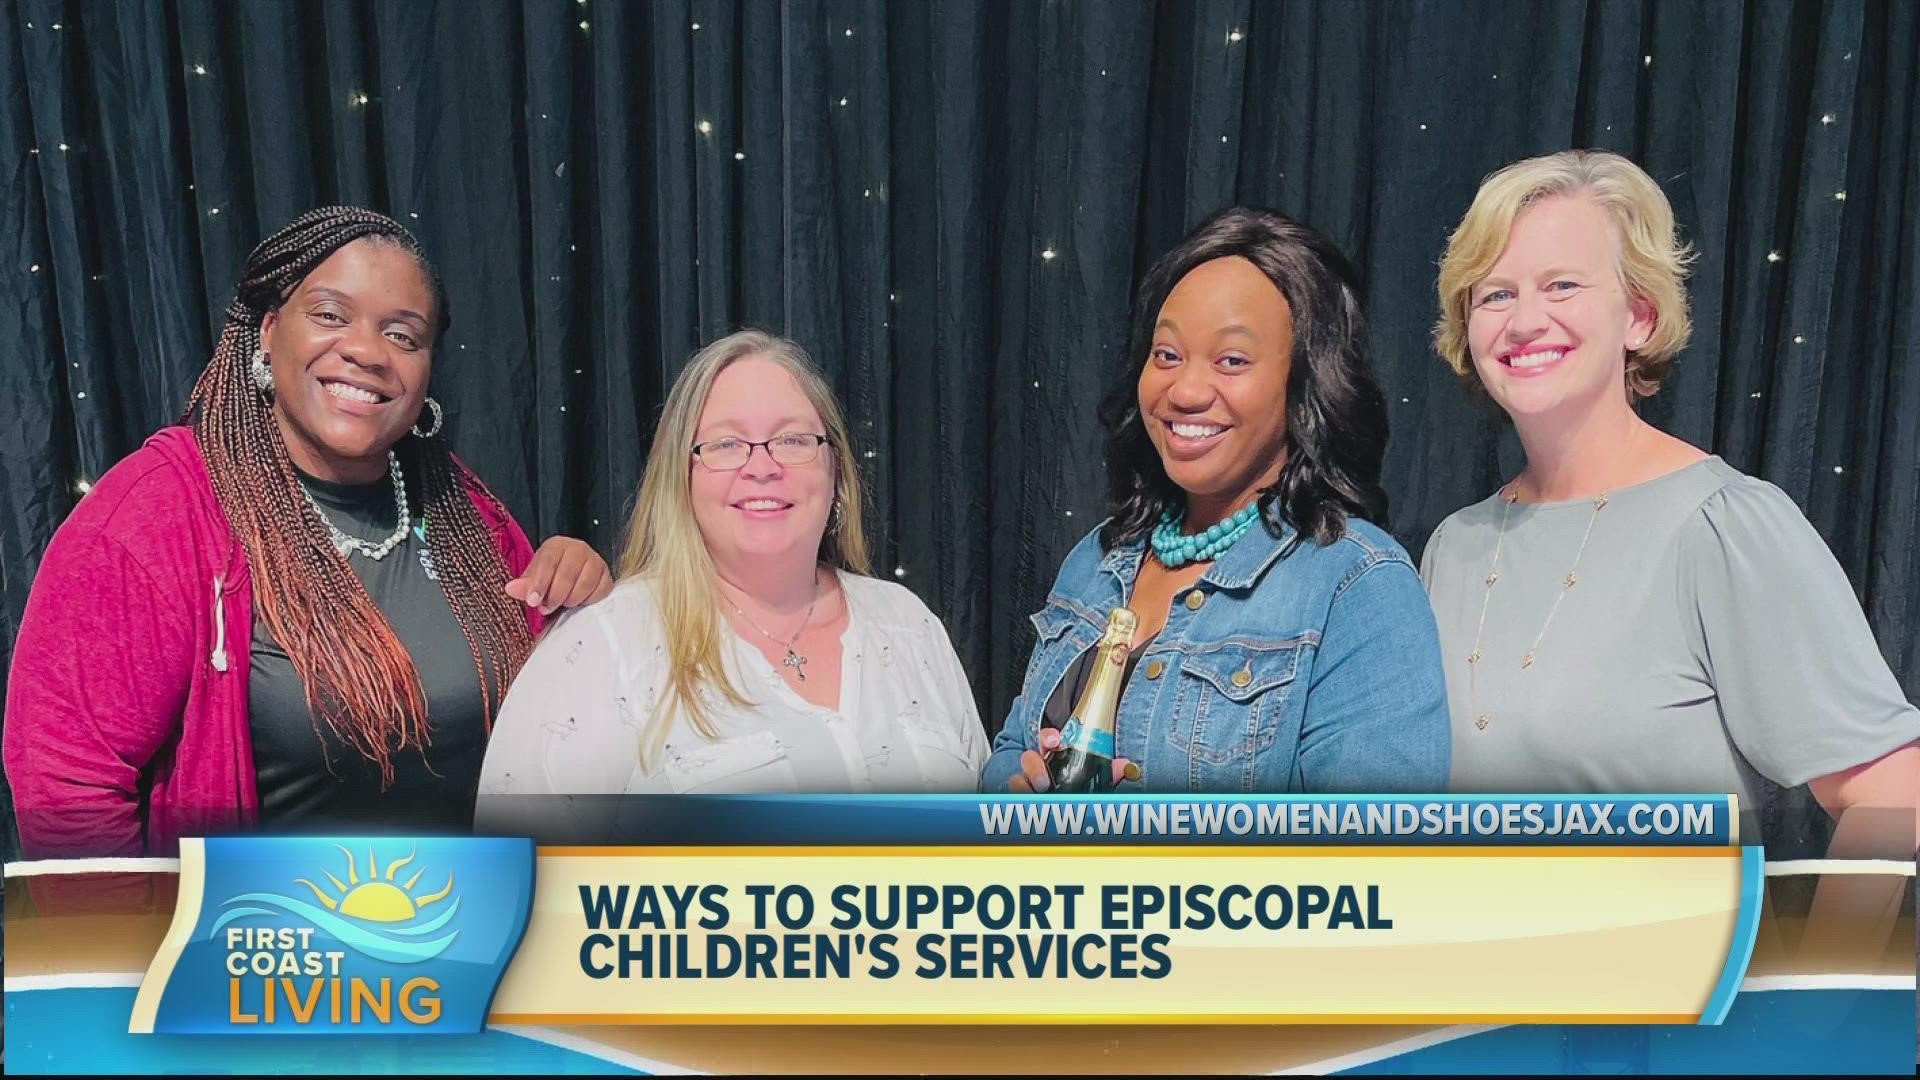 Hear from the Executive Director of Episcopal Children’s Services, as well as the founder of one of this year's vendors, Becca Porter of An Unlikely Pear.